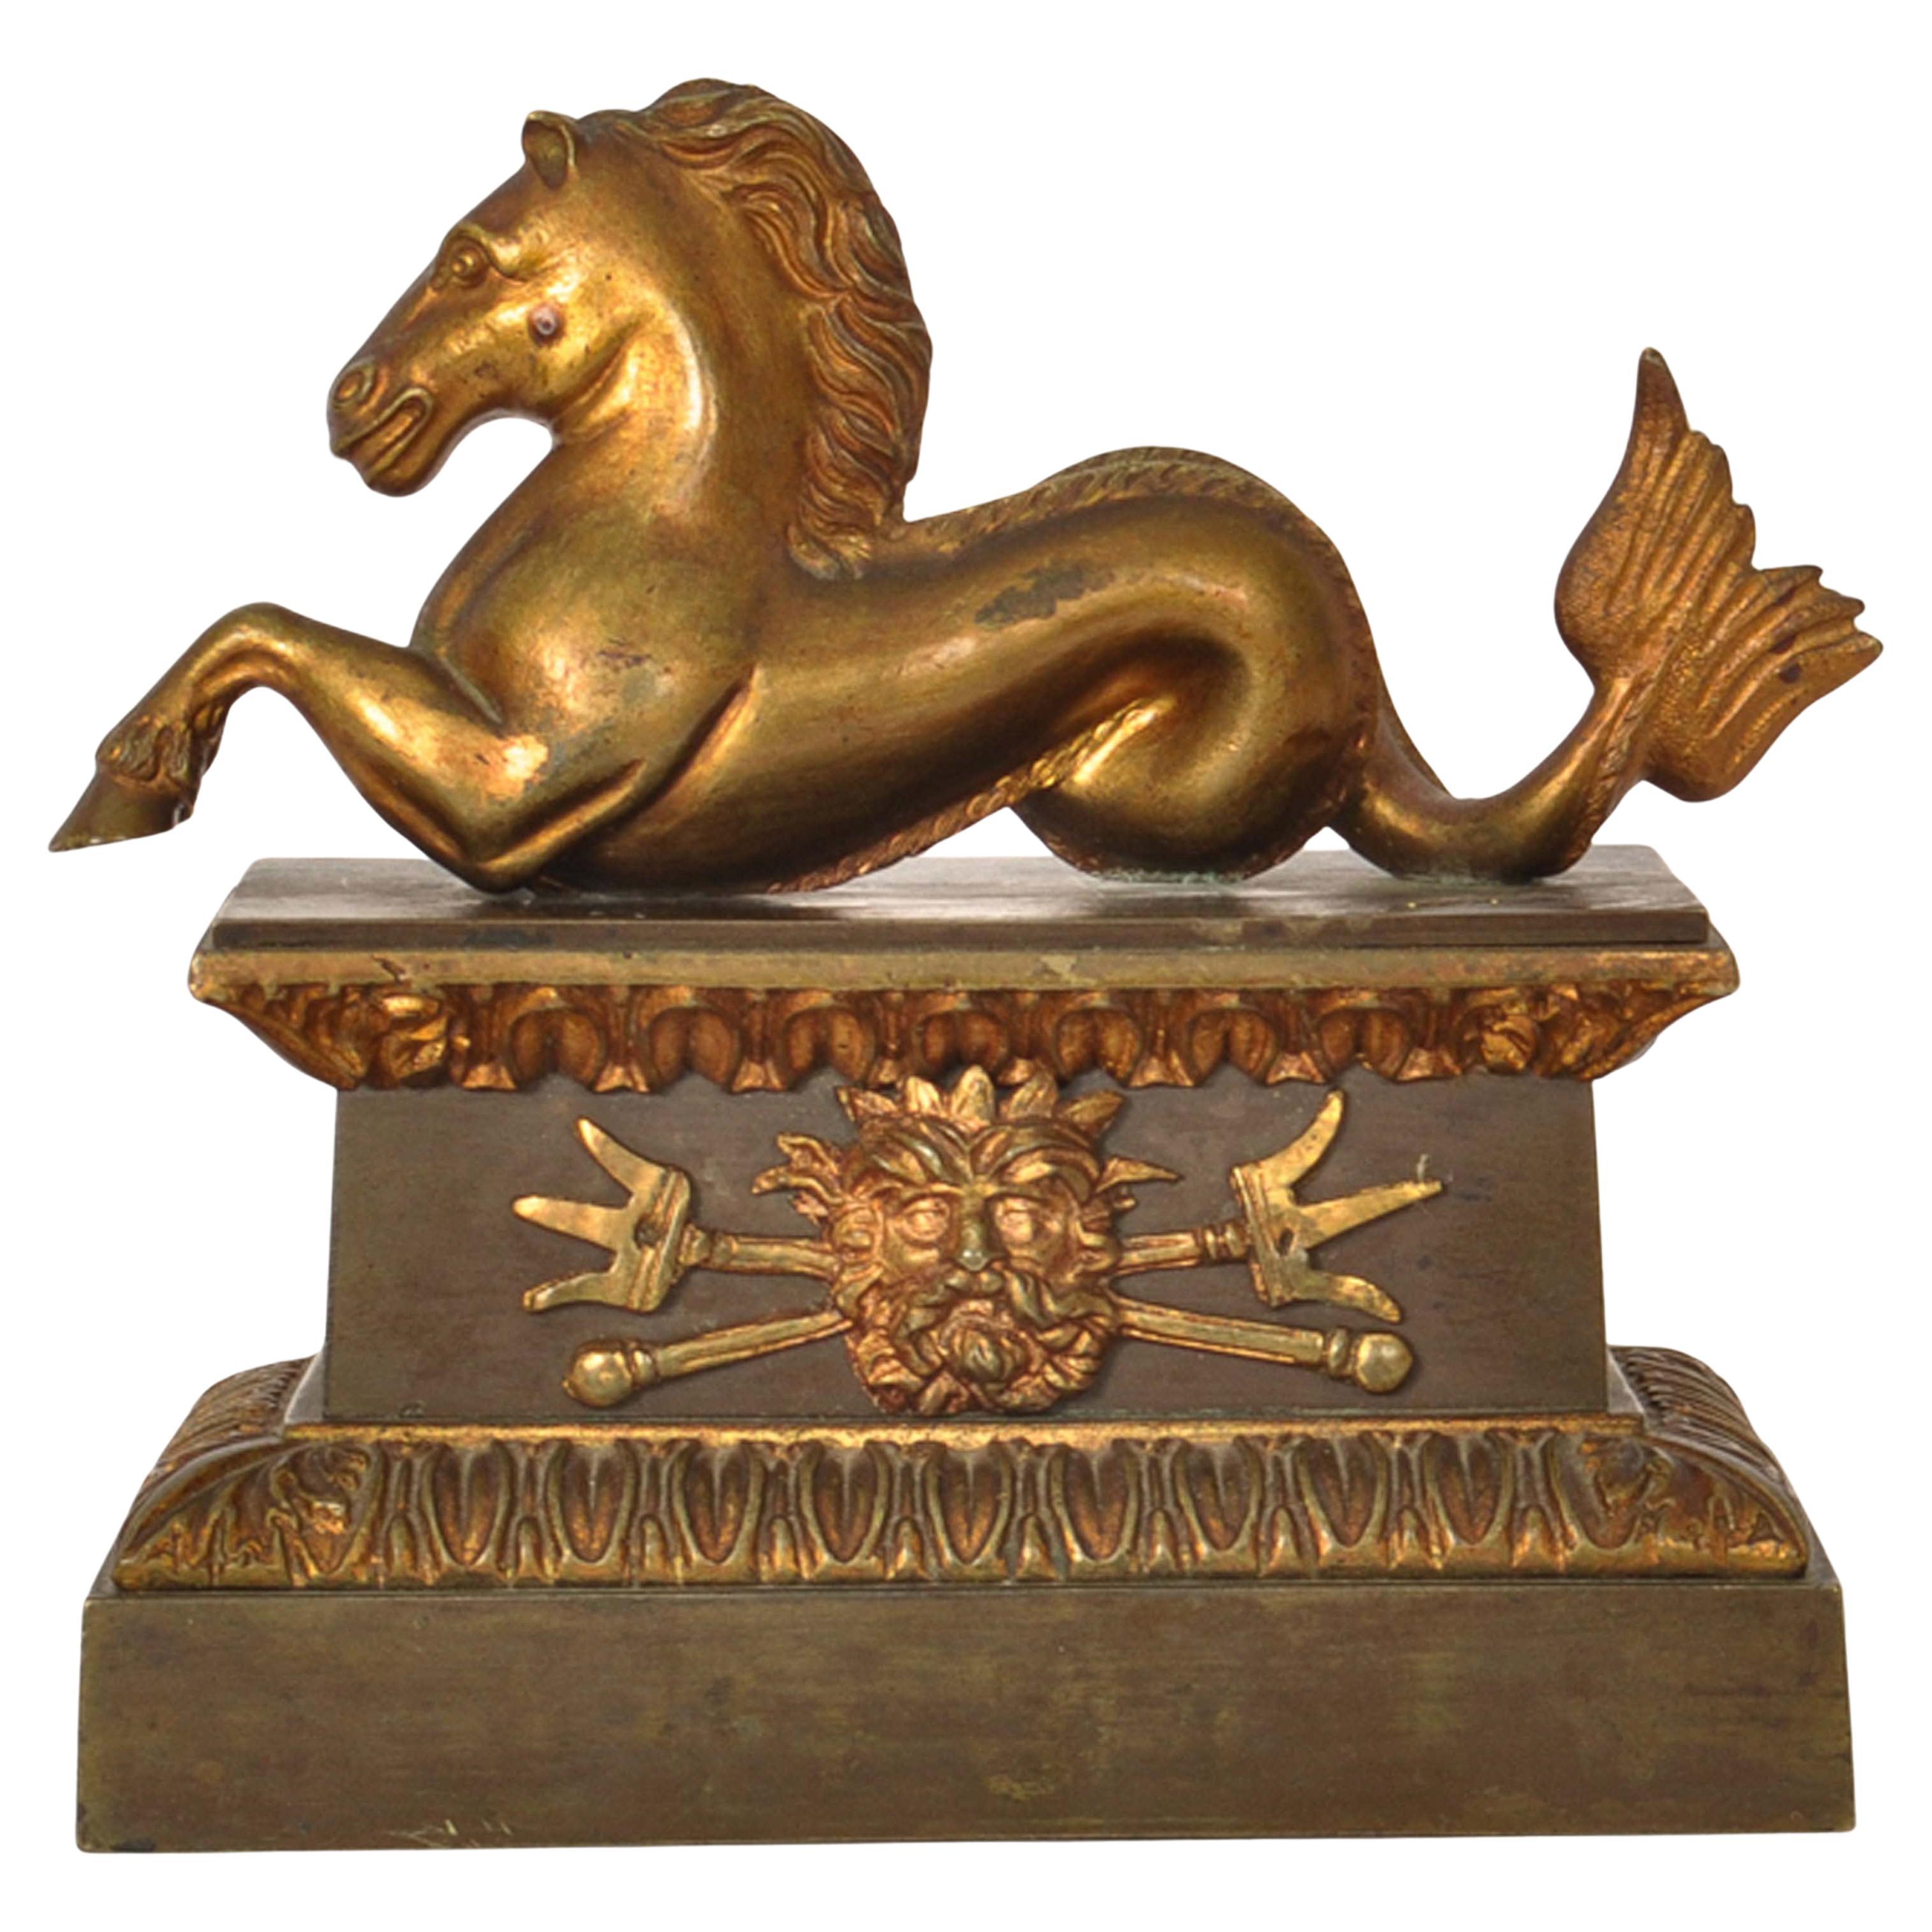 A fine antique French Grand Tour cast bronze hippocampus, seahorse statue desk ornament, circa 1820.
This wonderful bronze is cast by the lost wax method (cire perdue), it depicts a Hippocampus from Roman (& Greek) mythology, a creature with the